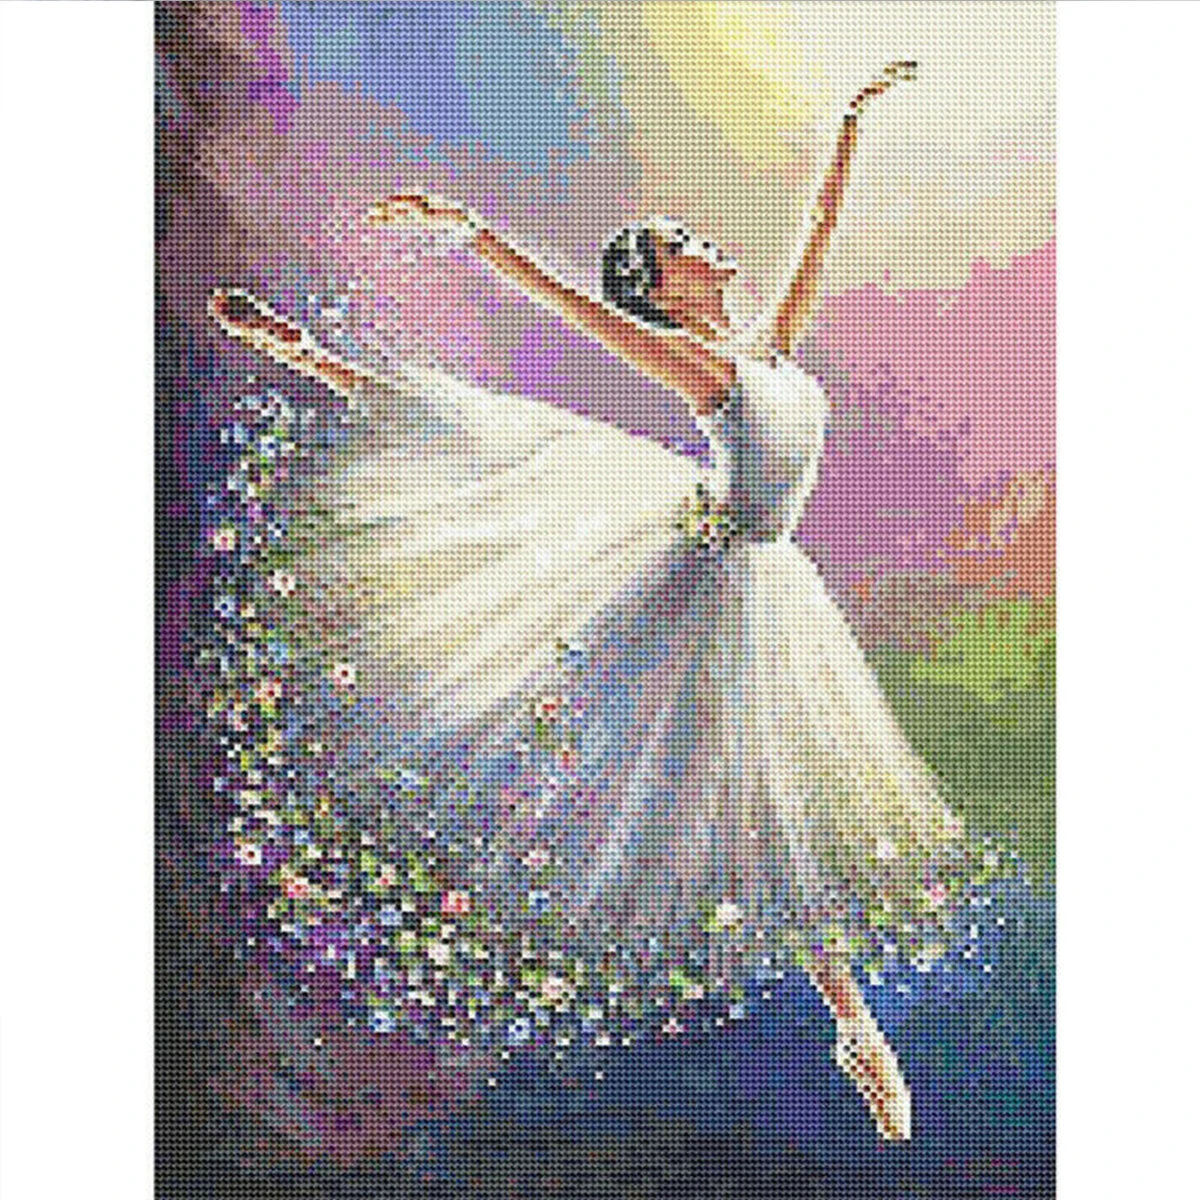 Diy 5d diamond painting kit ballet handmade craft cross stitch embroidery home office wall decorations